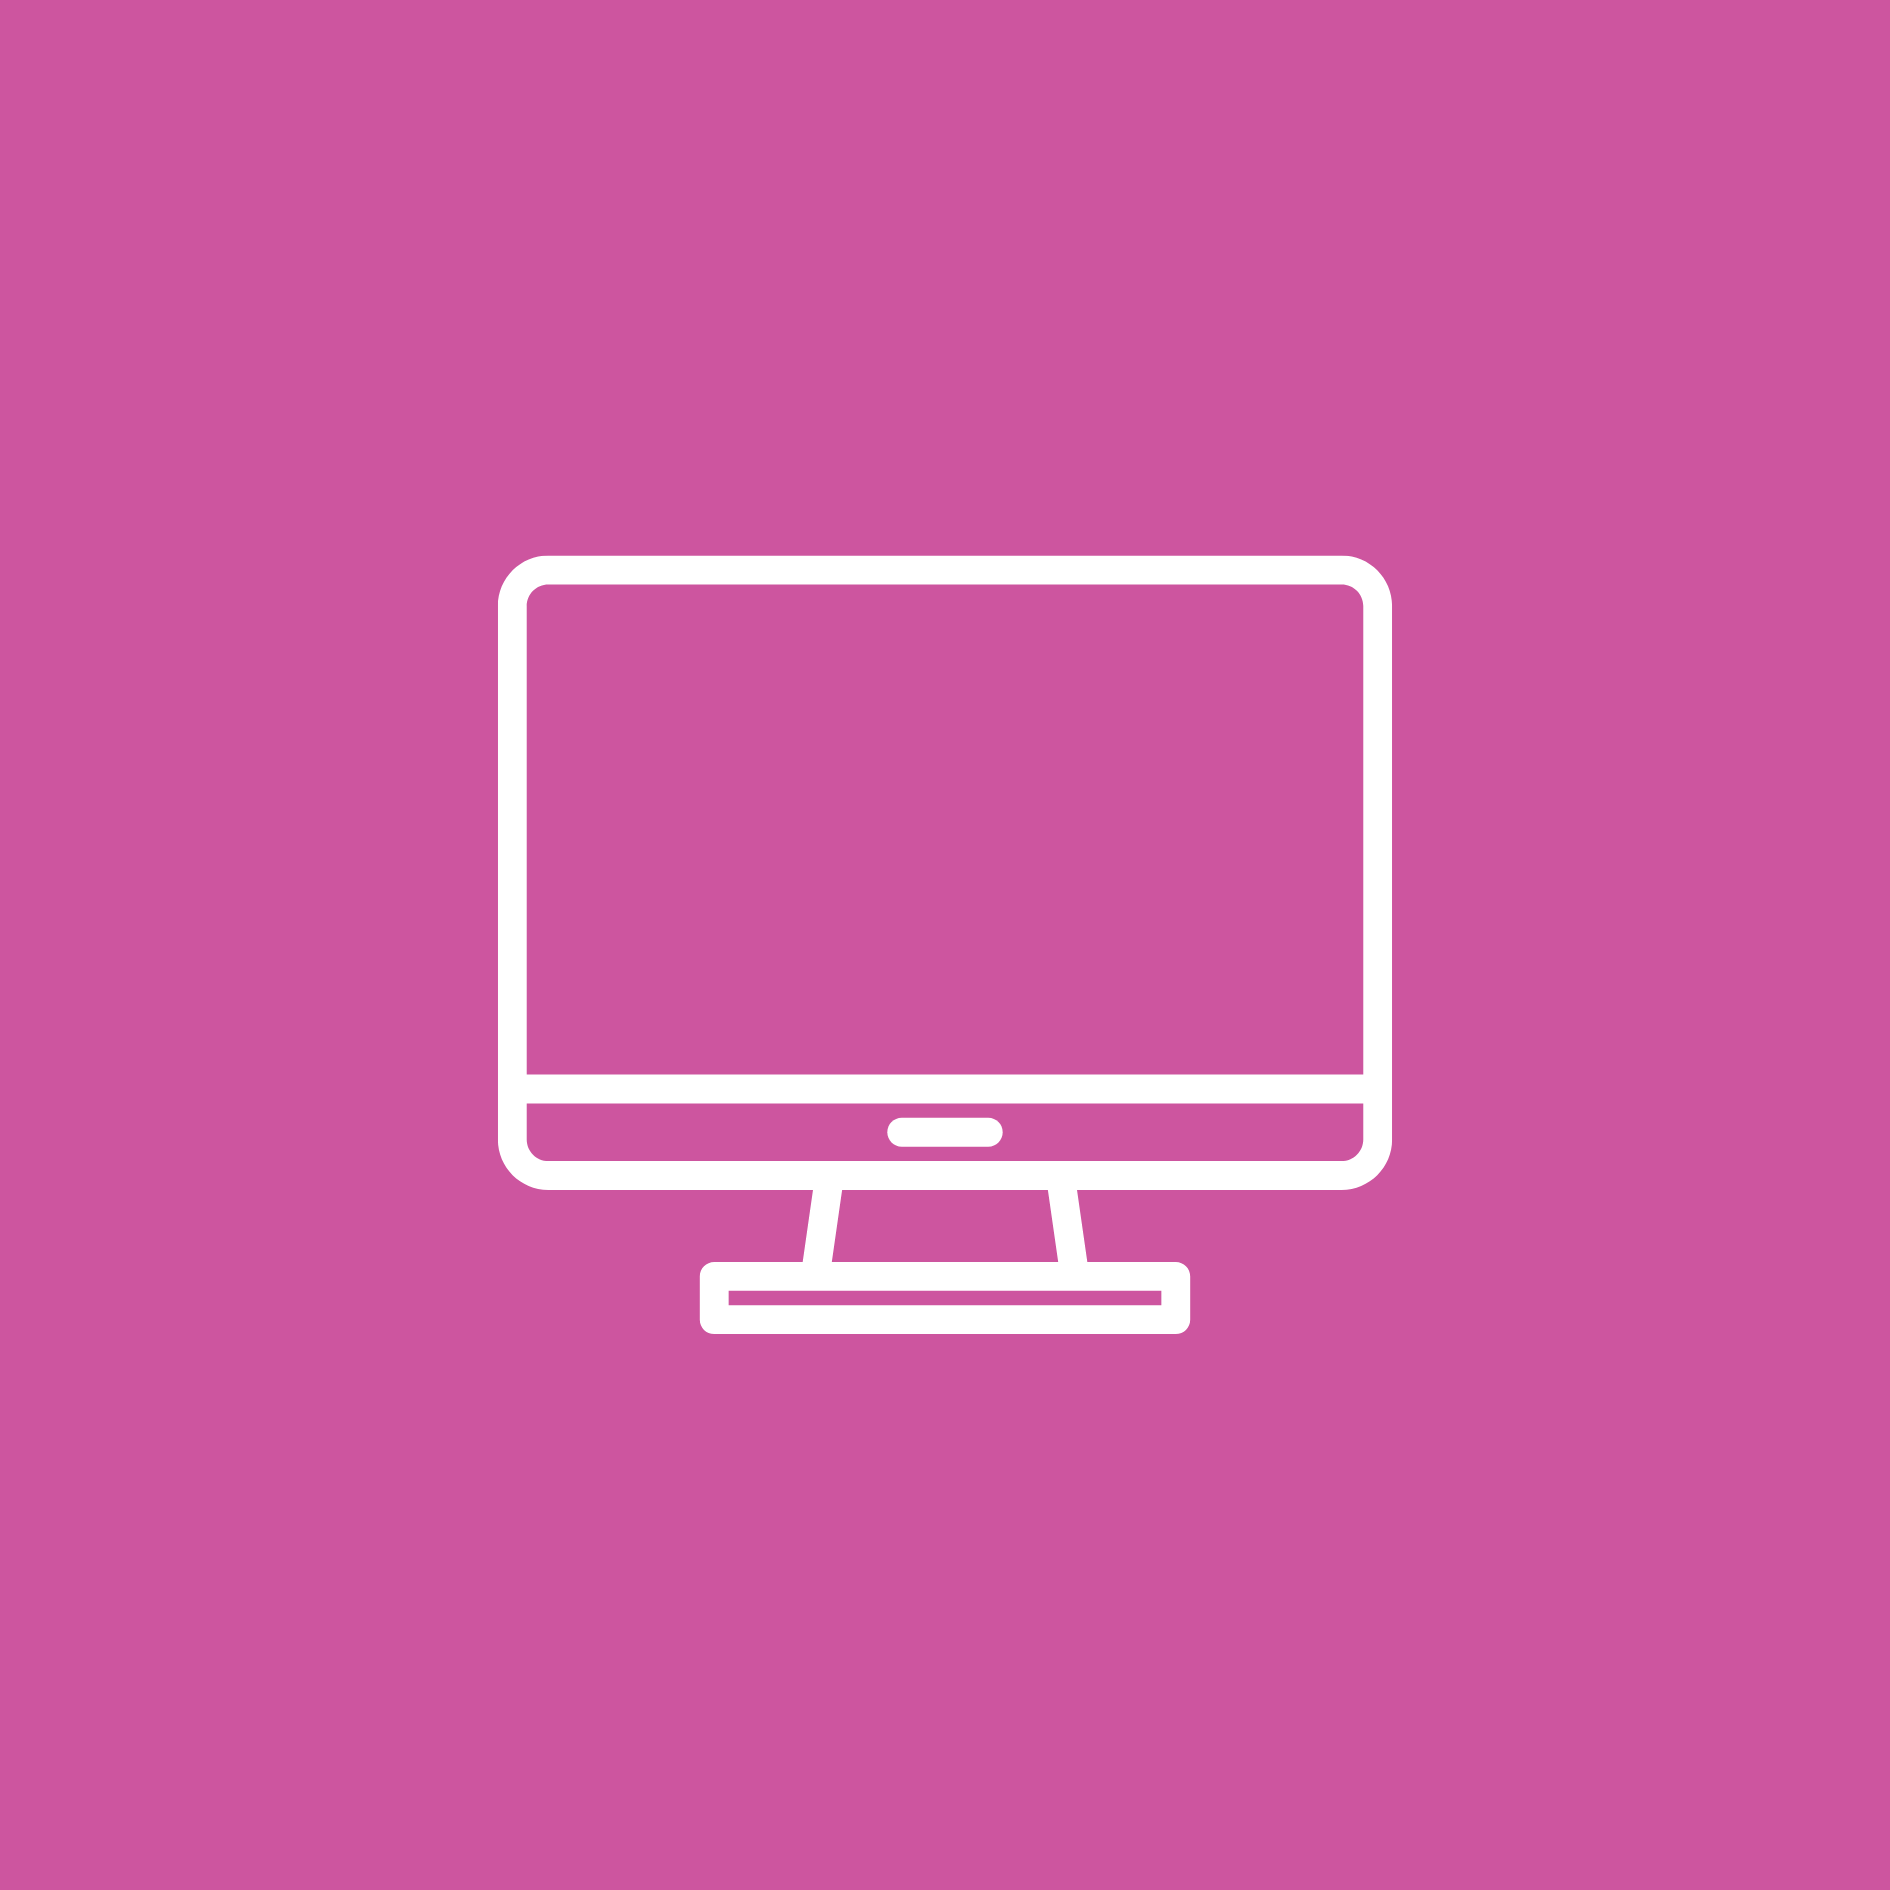 A line icon of a computer monitor on a pink background.